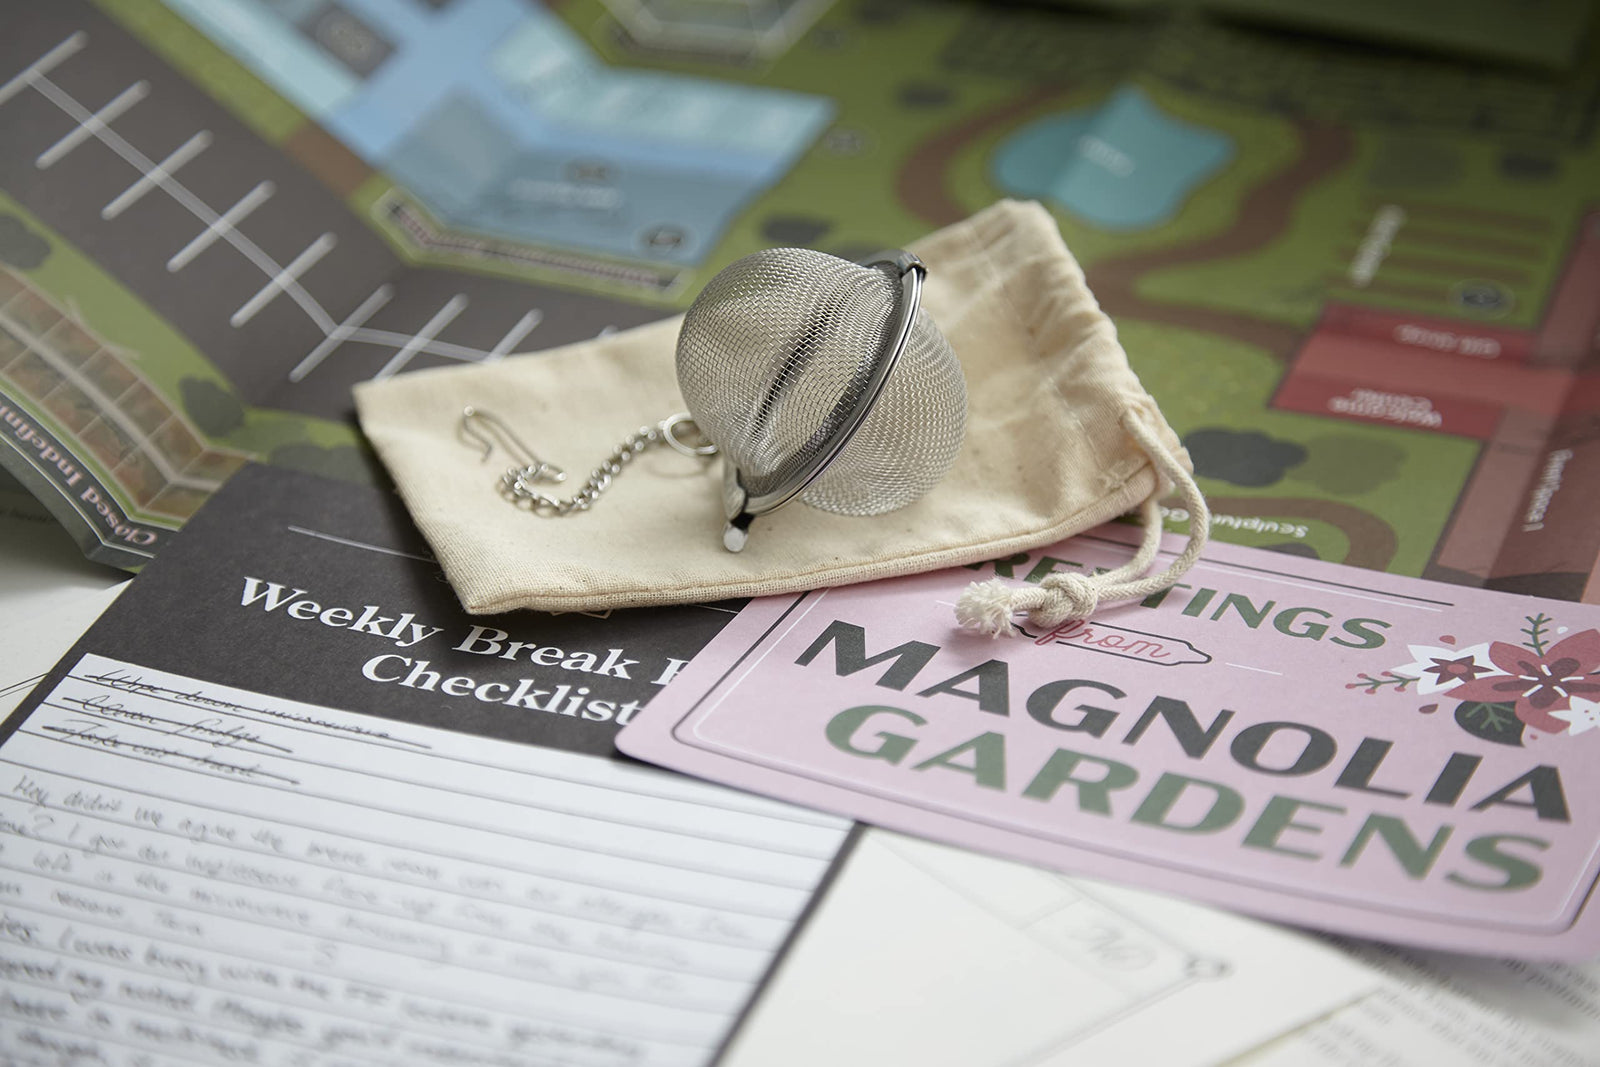 Hunt A Killer Nancy Drew - Mystery at Magnolia Gardens, Immersive Murder Mystery Game, Examine Evidence, Eliminate Suspects, Catch the Culprit, For Aspiring Detectives, Game Night, AMZ Exclusive